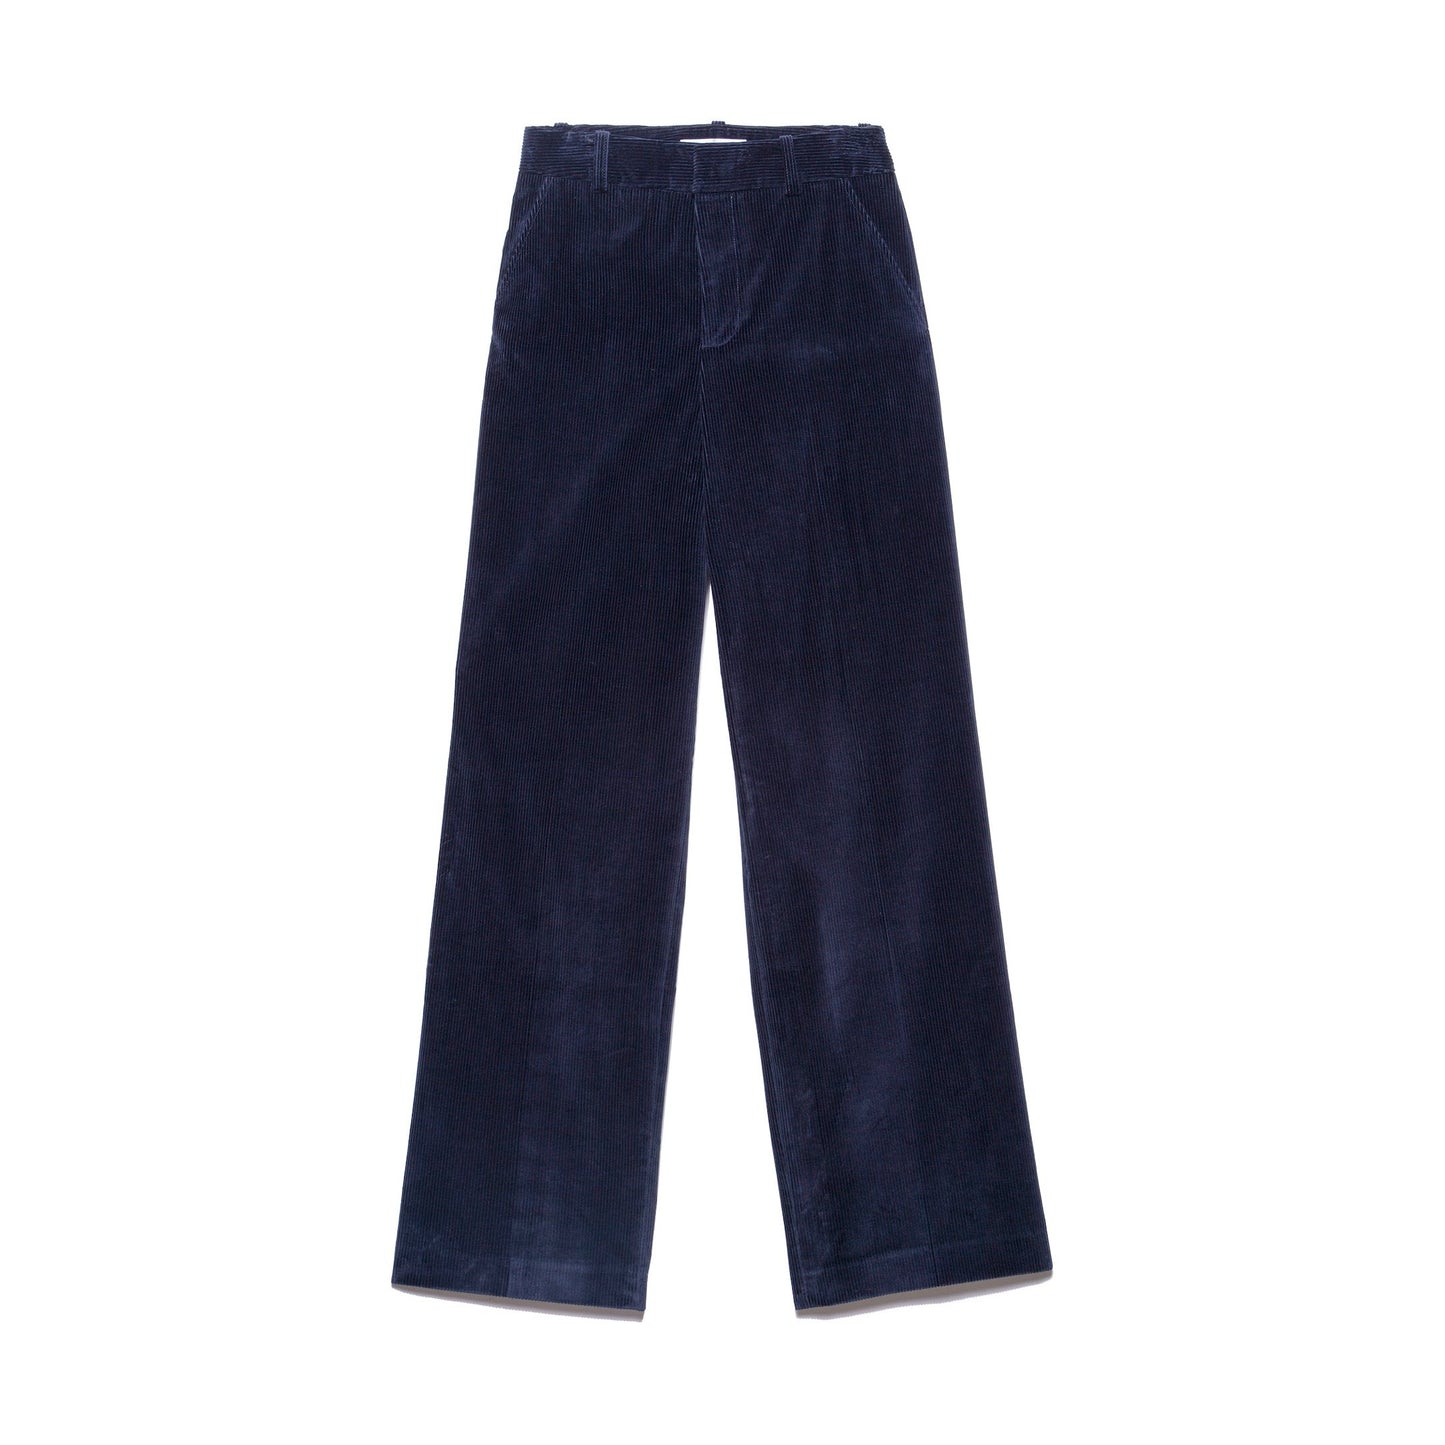 Corduroy High Rise Trouser in Navy Blue